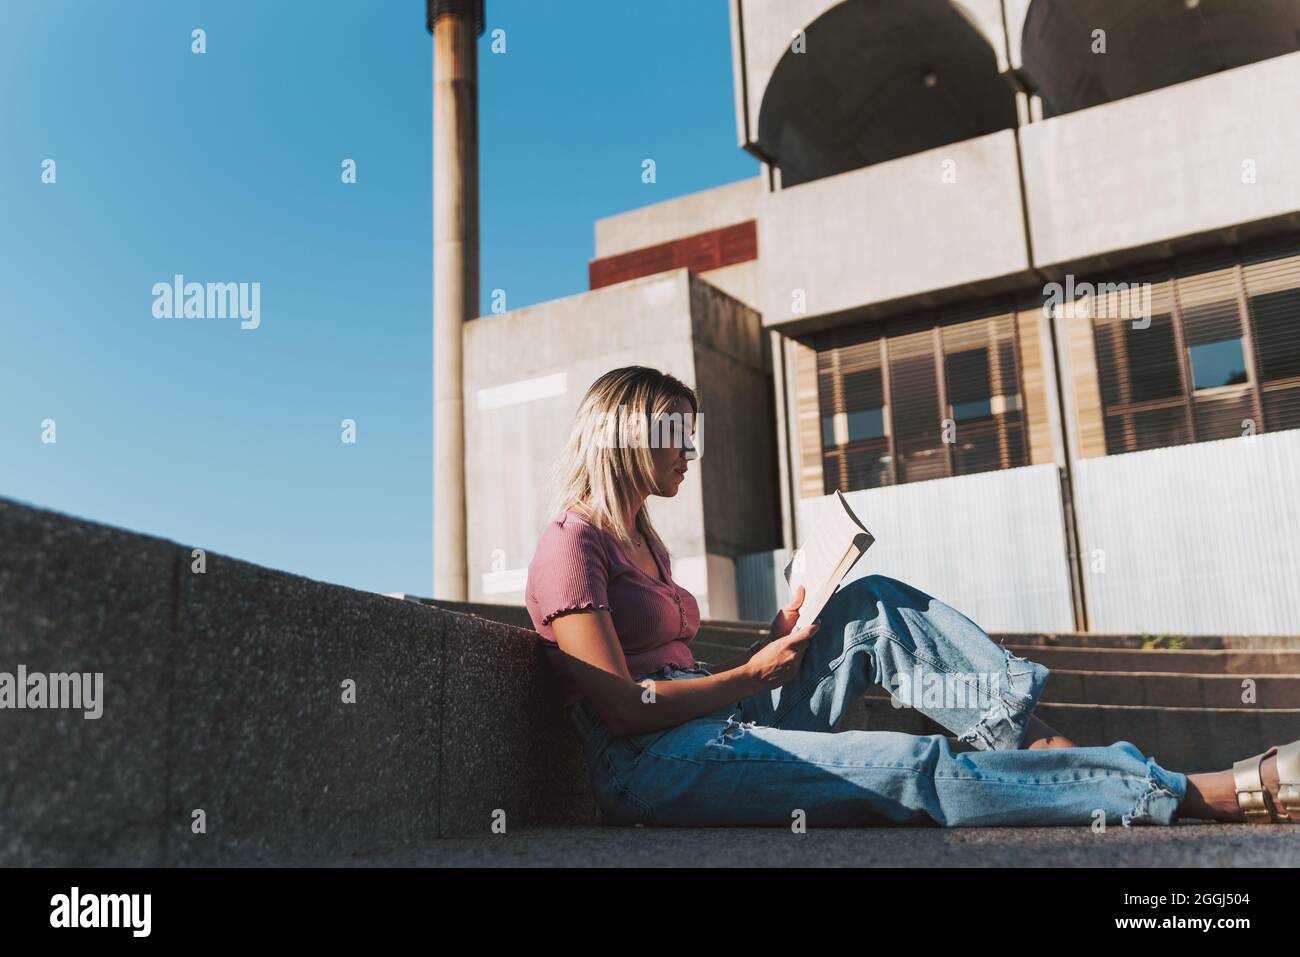 Blonde girl lying down reading a book in an urban environment. Concrete building in the background. Stock Photo